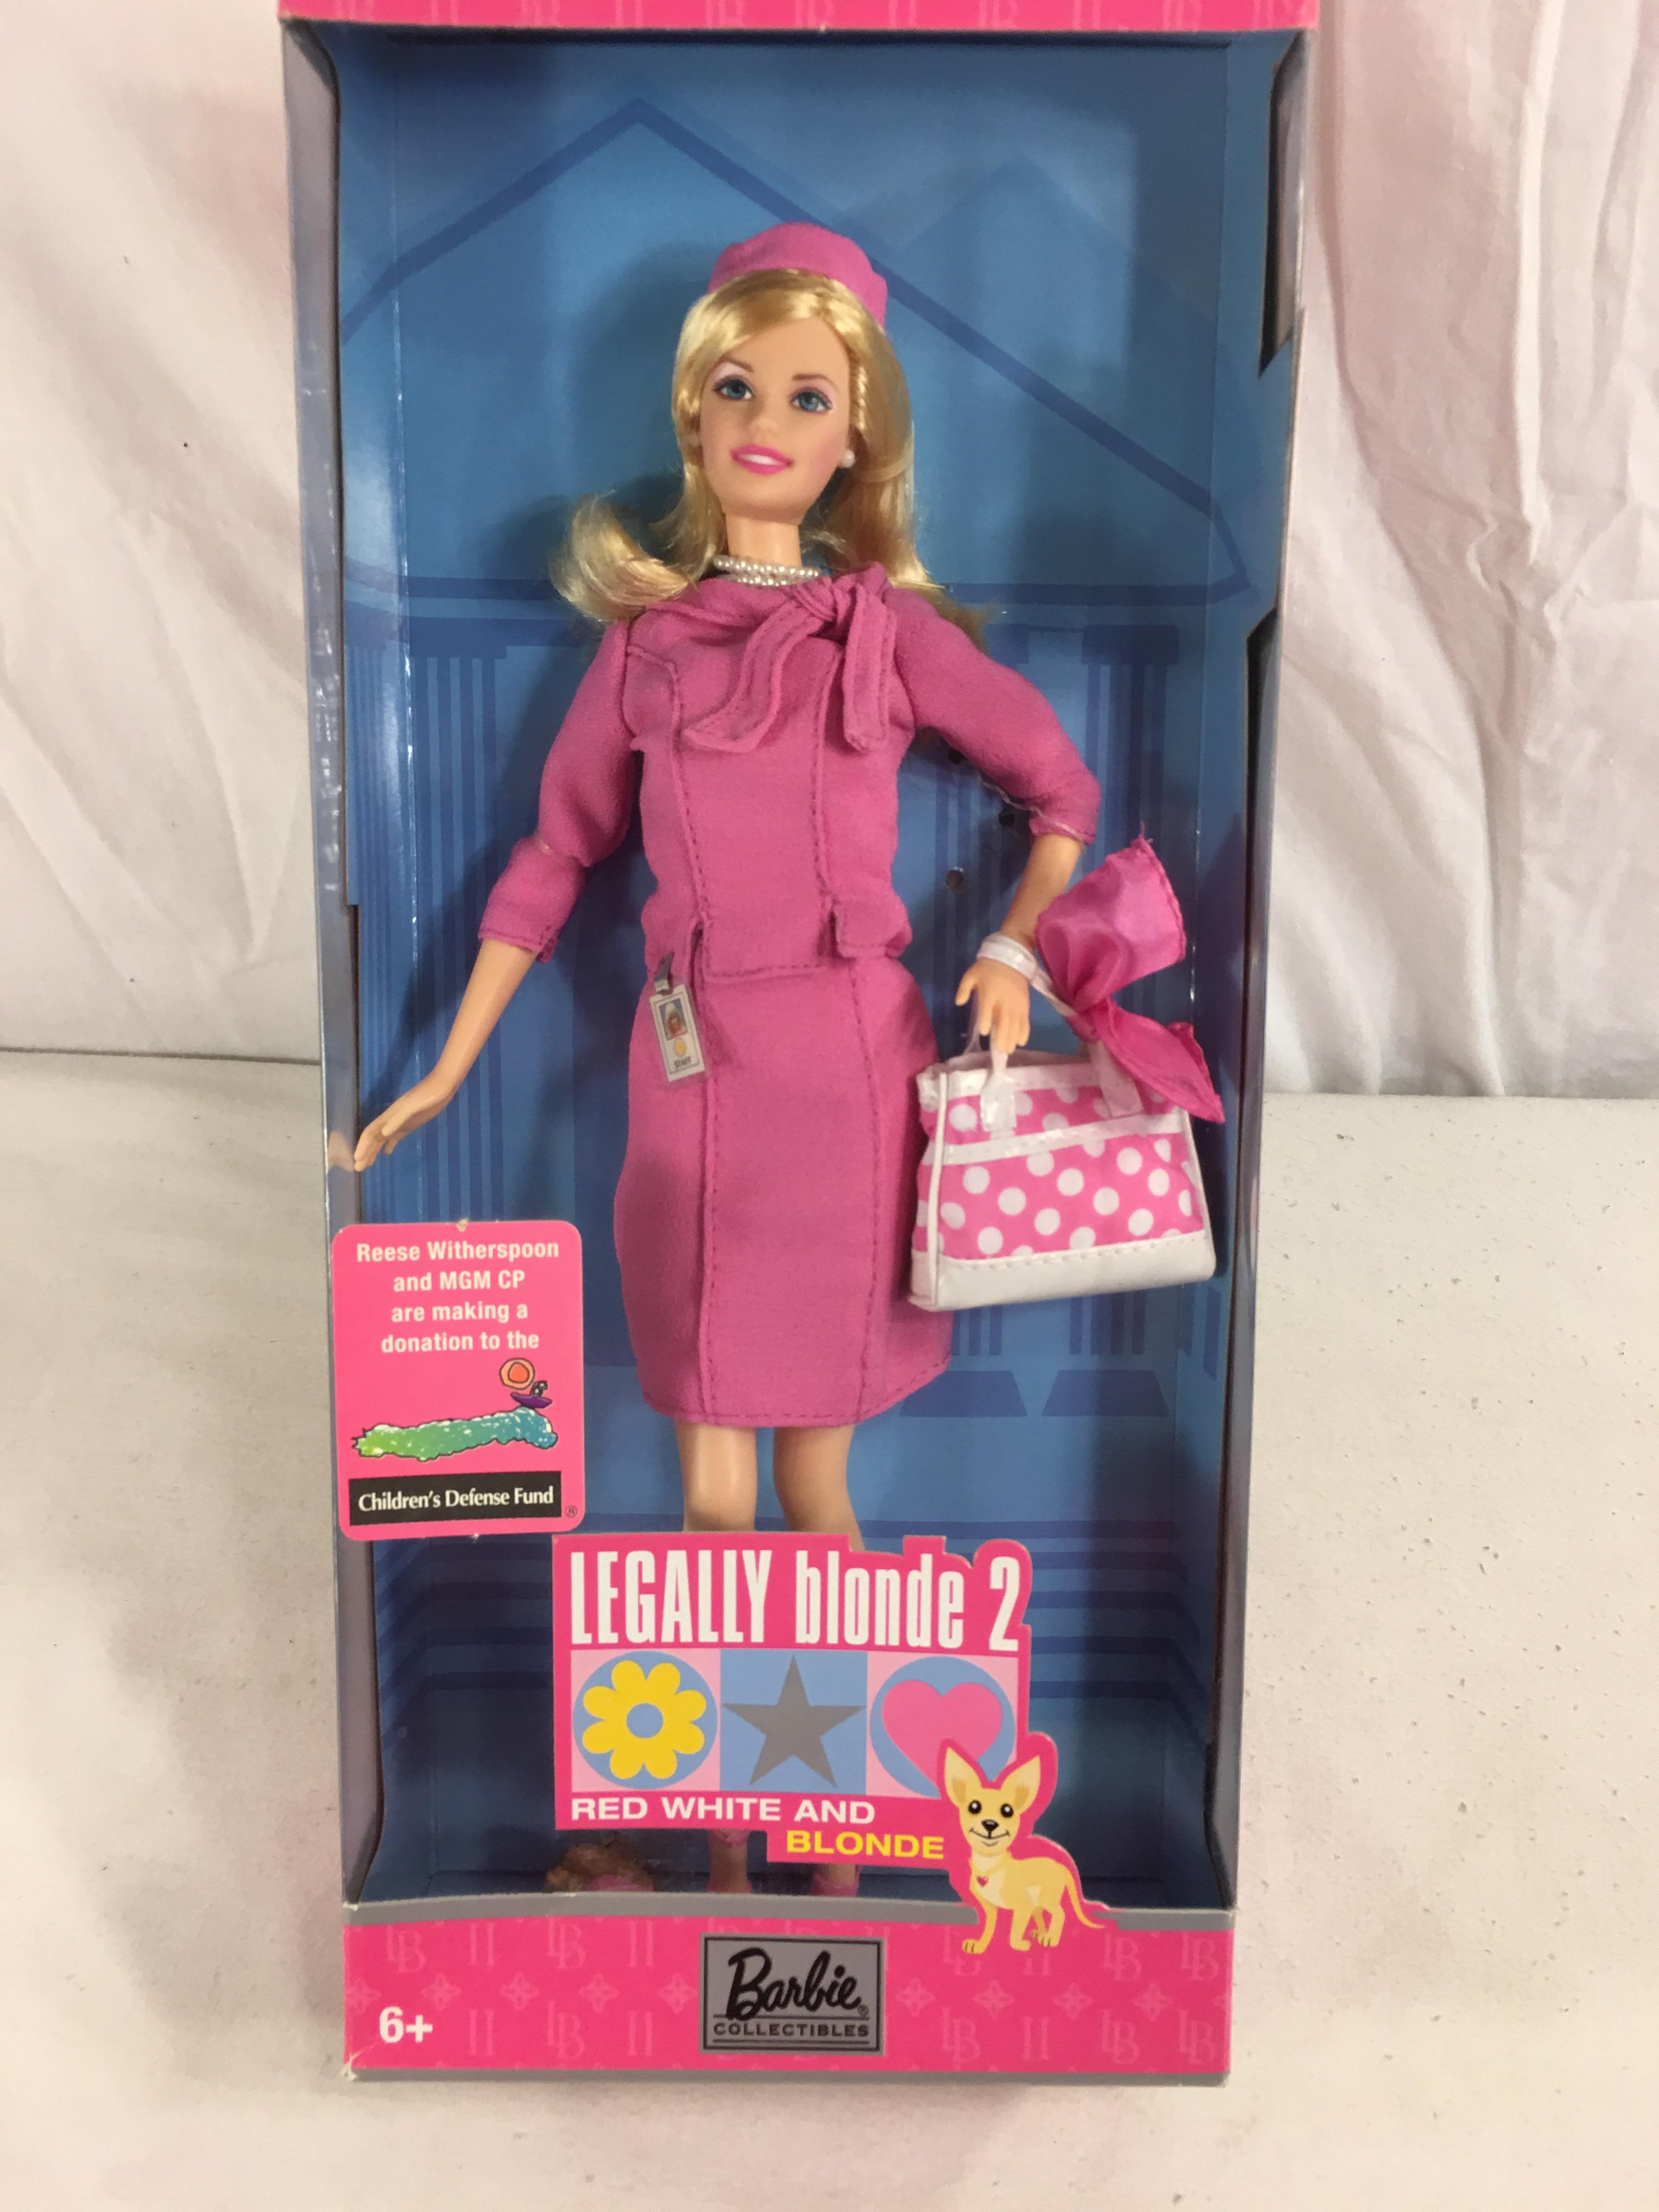 Collector Barbie Mattel Doll Collector Edition Legally Blonde 2 Doll 12.5"tall Box